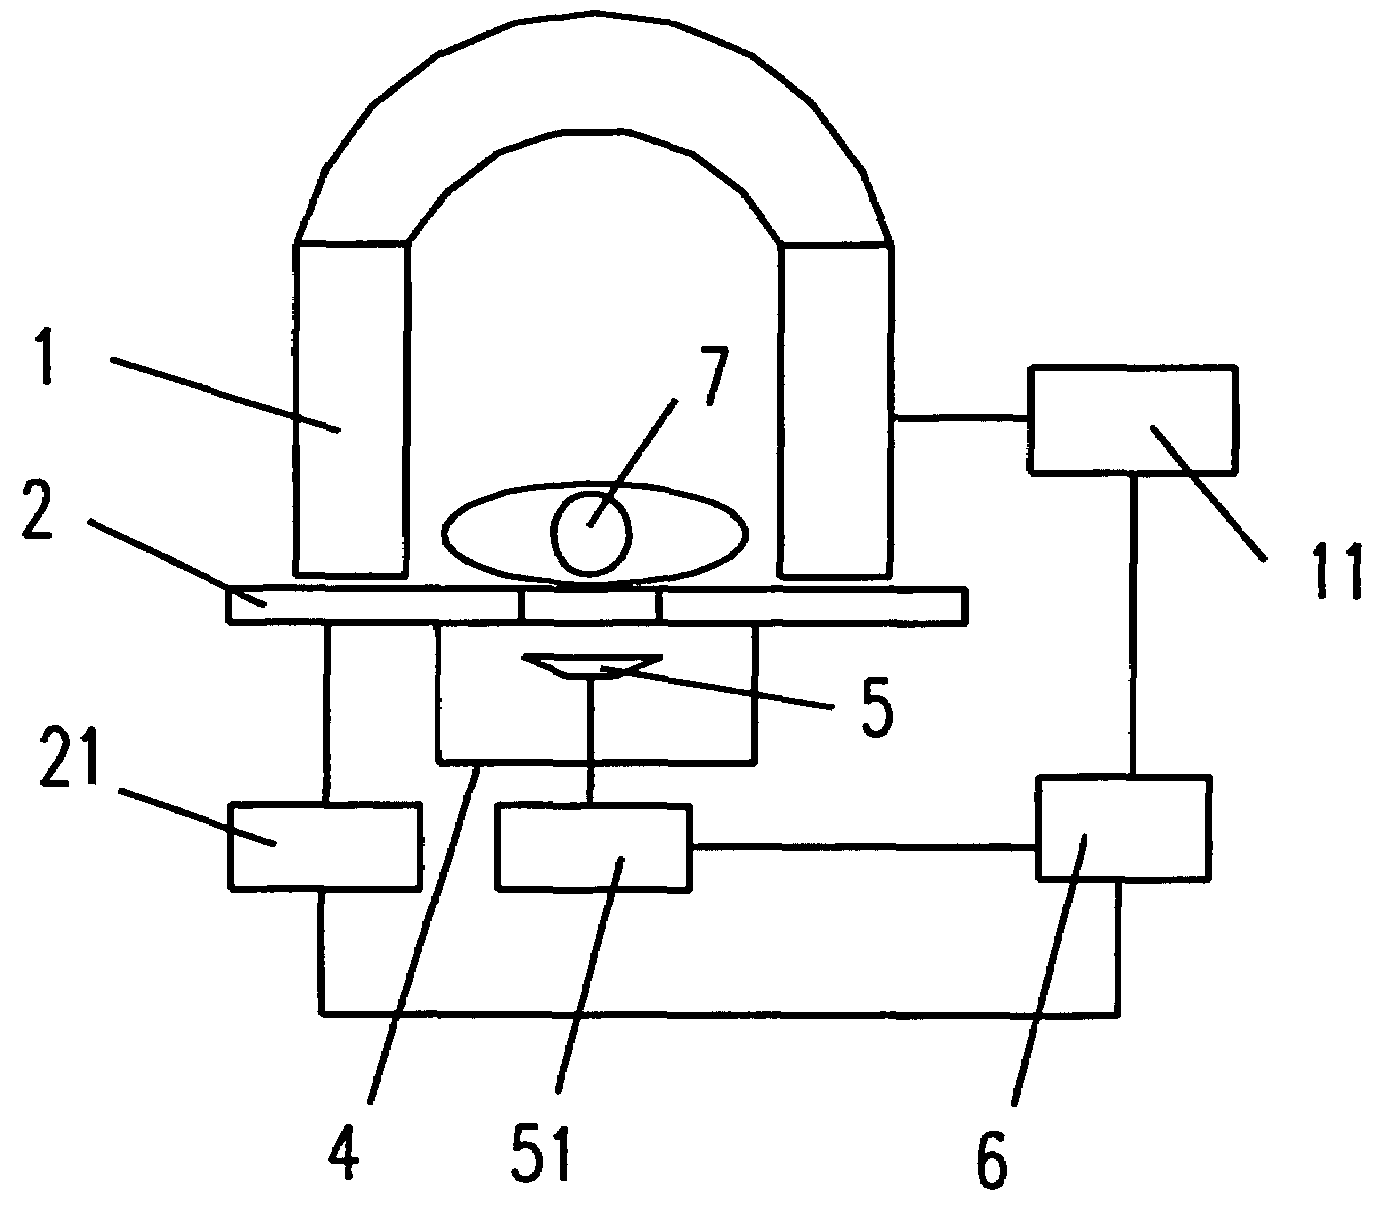 MRI guided ultrasound therapy apparatus